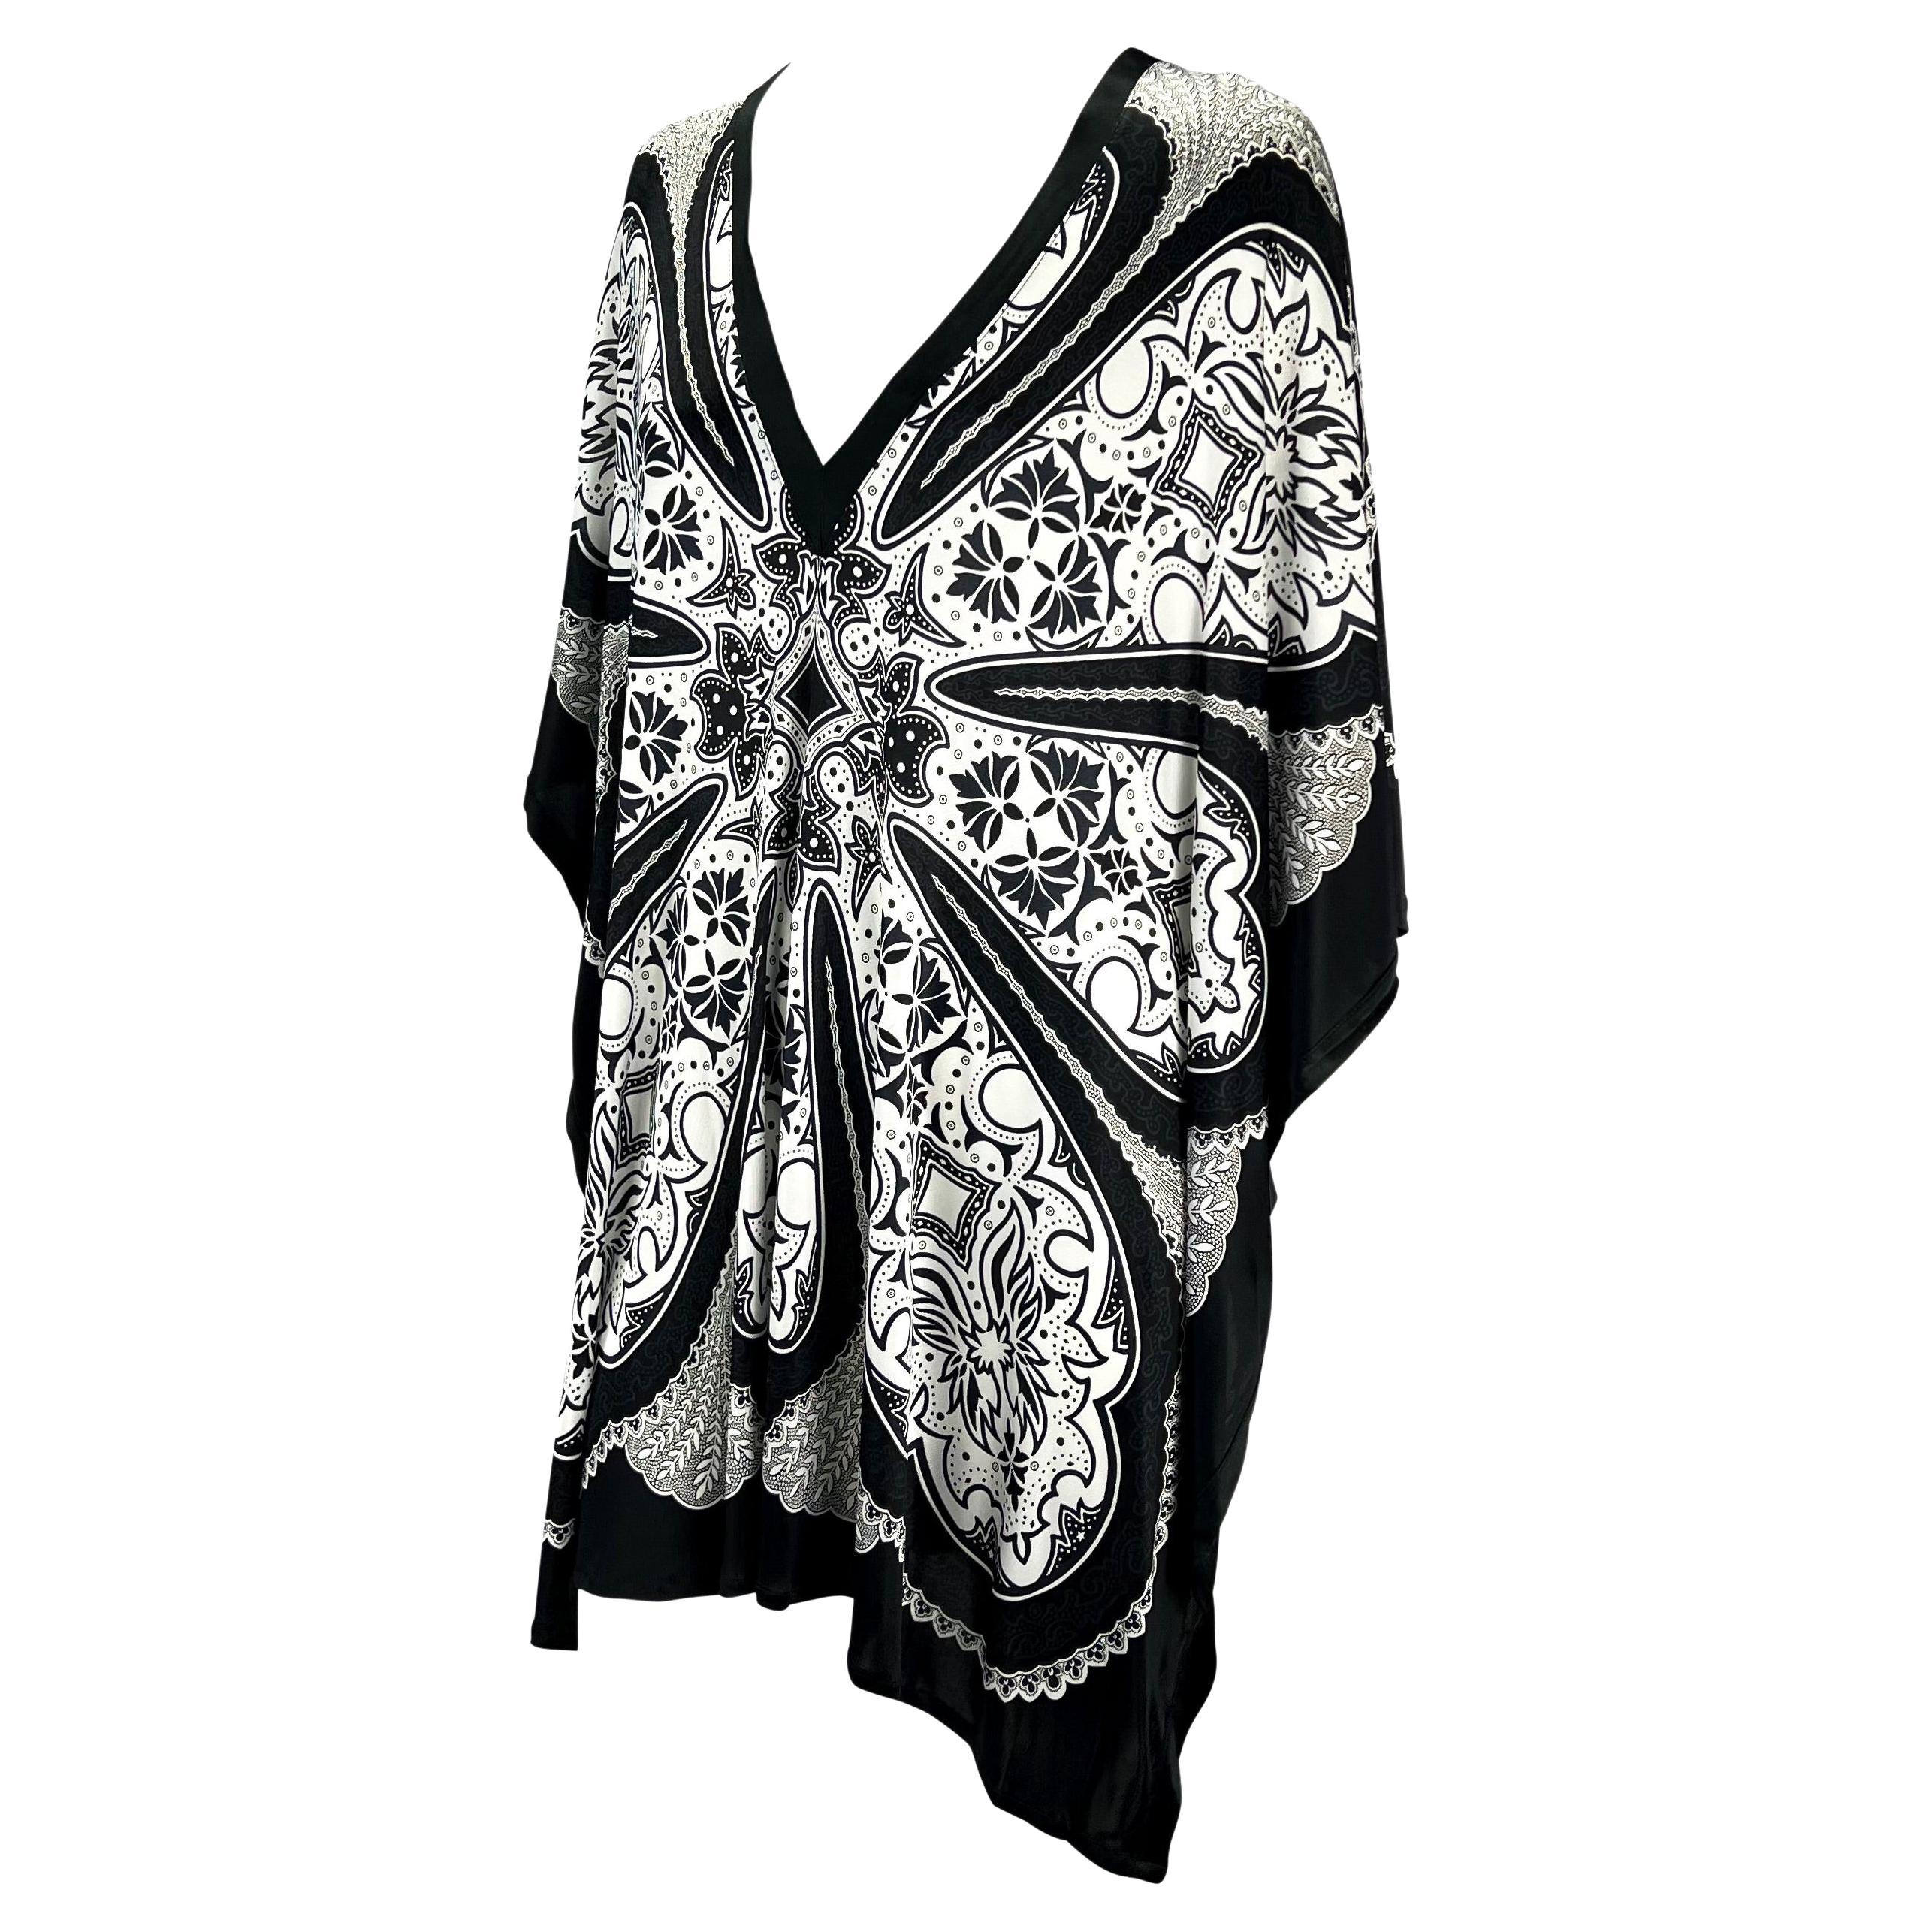 Presenting a fabulous bandana print Gucci cover-up, designed by Tom Ford. From the 2004 cruise collection, this kaftan proudly boasts a black and white bandana print, heavily used in one of Ford's last collections at Gucci. The oversized cover up